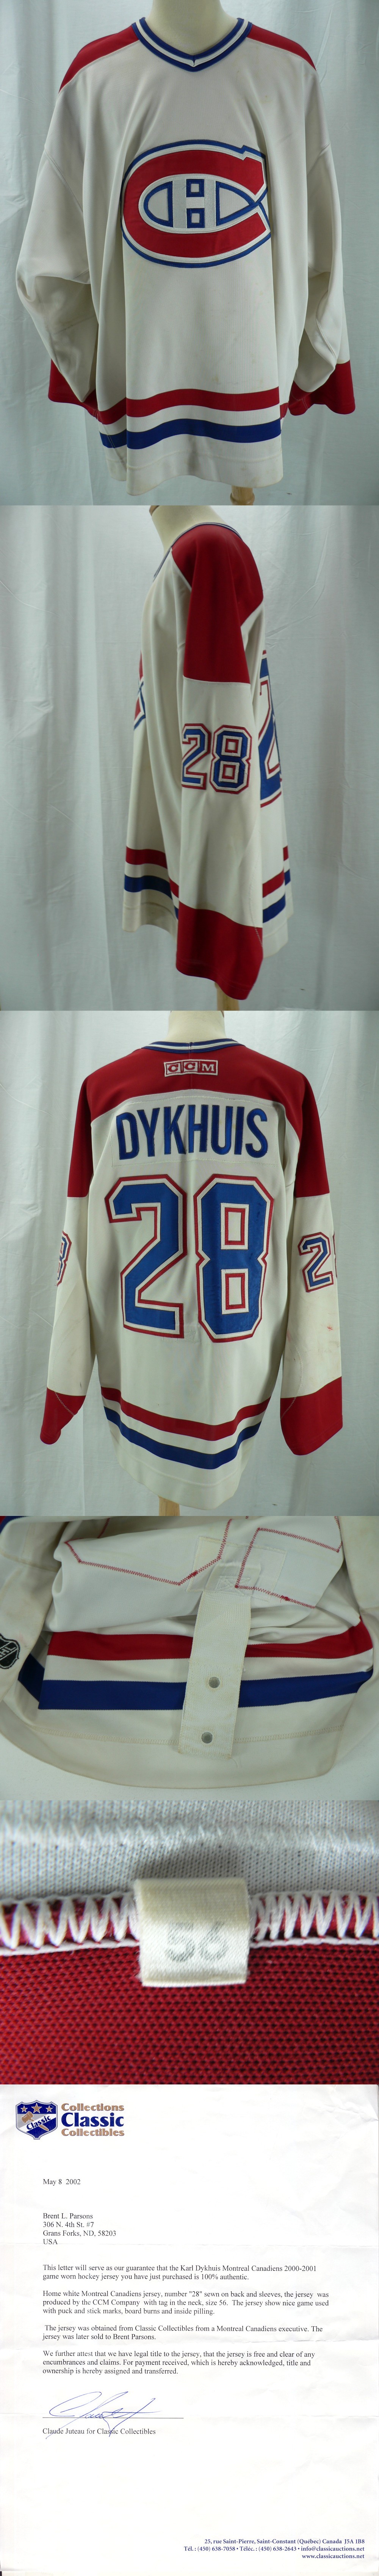 2000-01 MONTREAL CANADIENS K. DYKHUIS GAME WORN JERSEY & COA photo